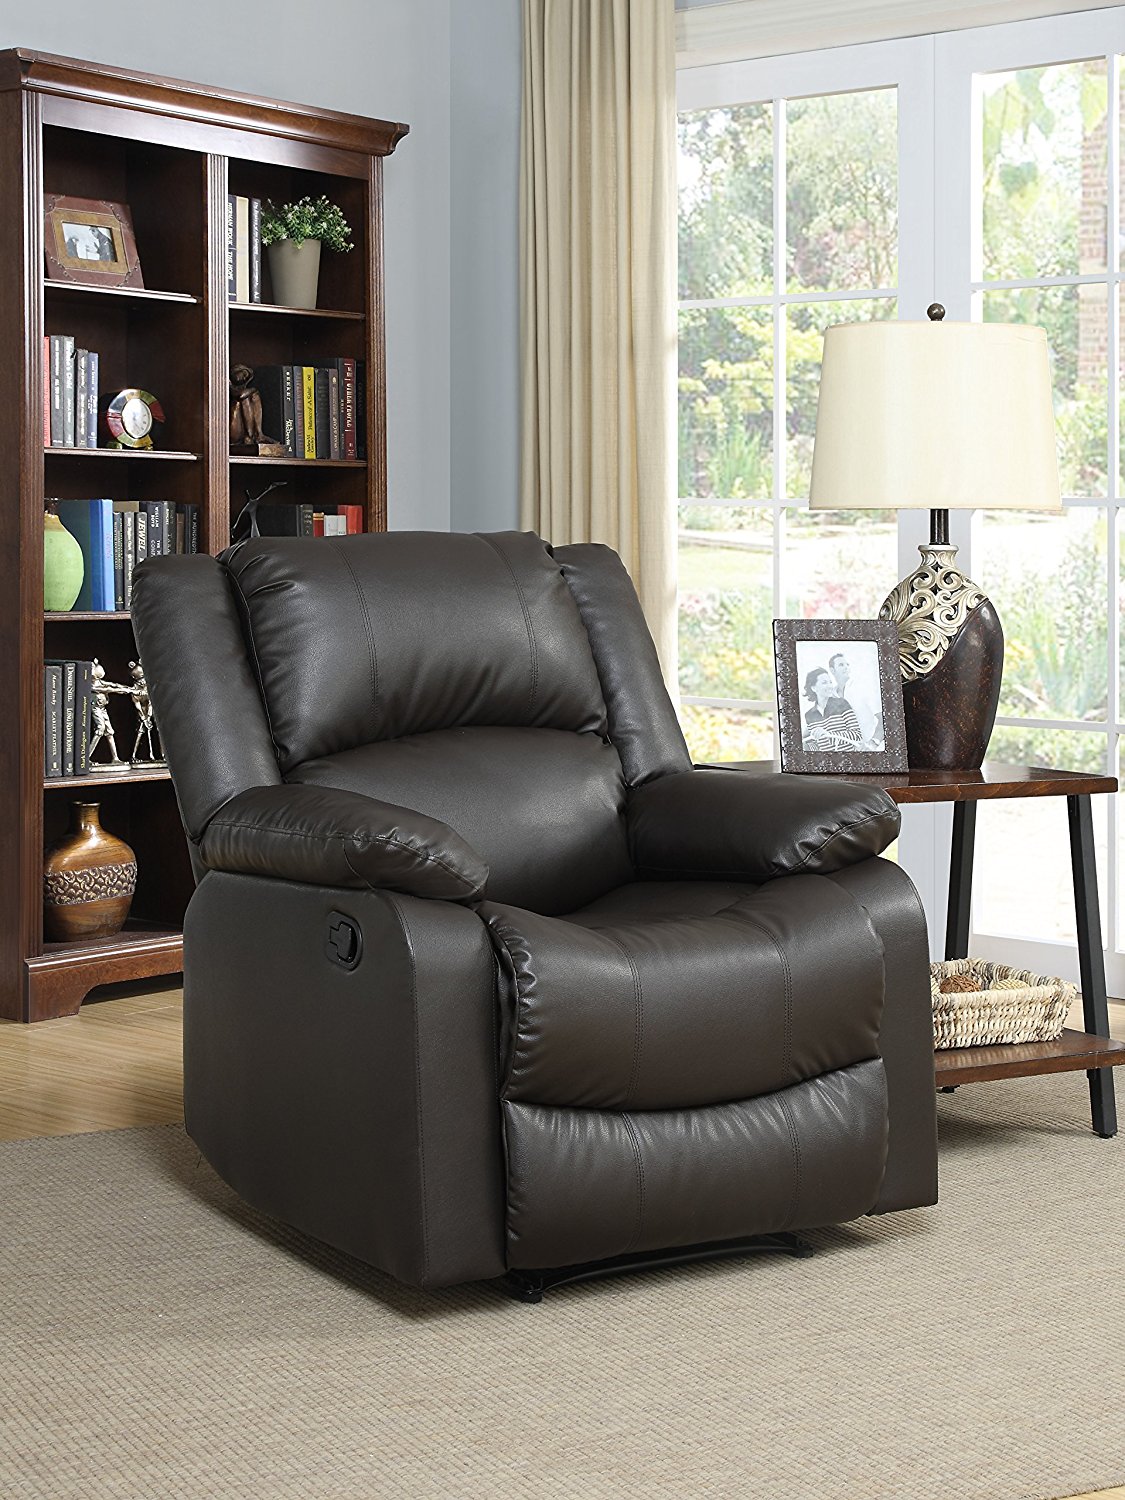 Top 10 Best Recliner Chairs in 2017 Reviews